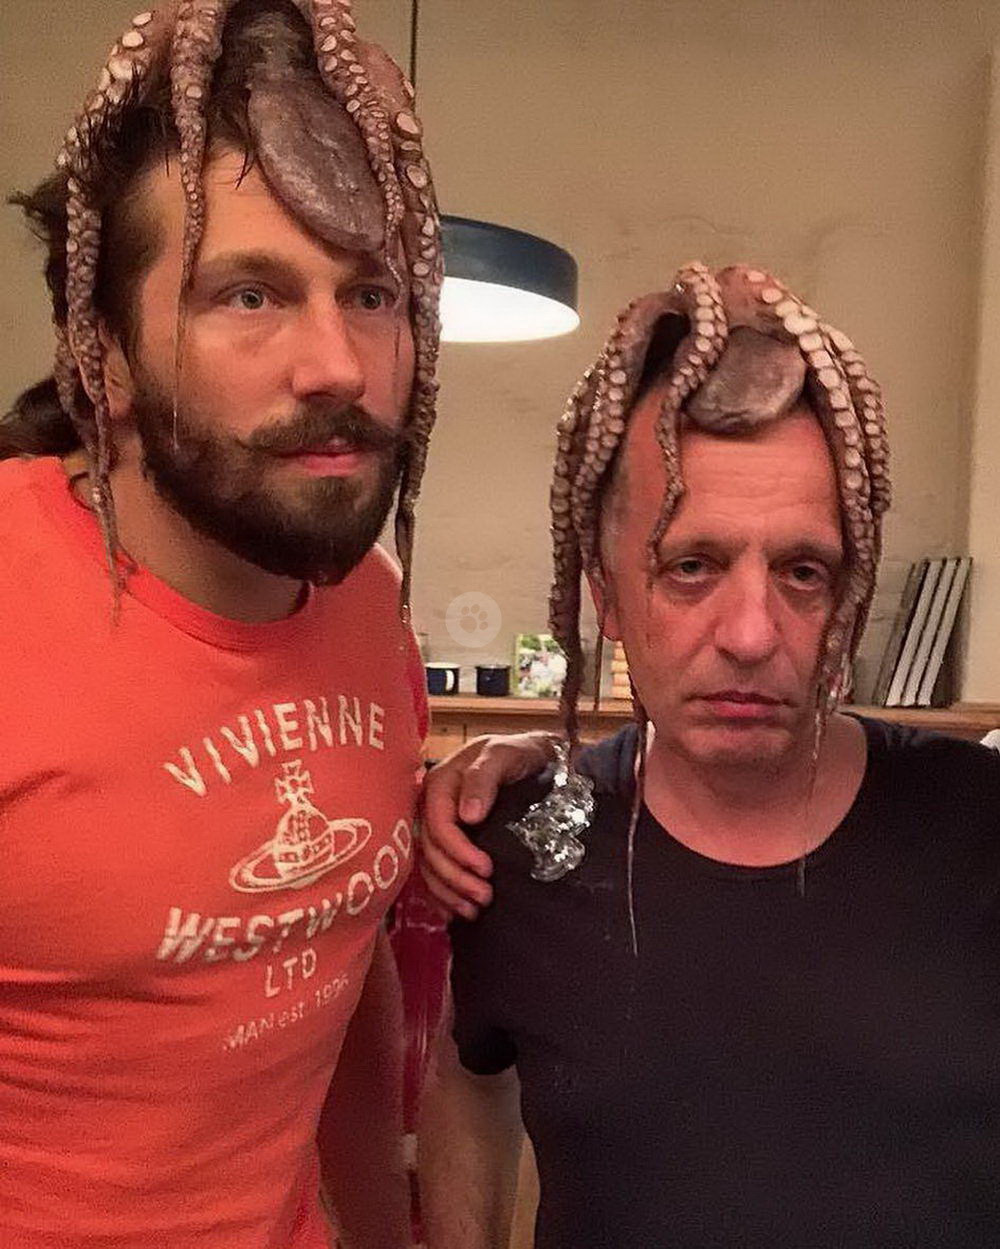 remarkable image of men with squids on their heads